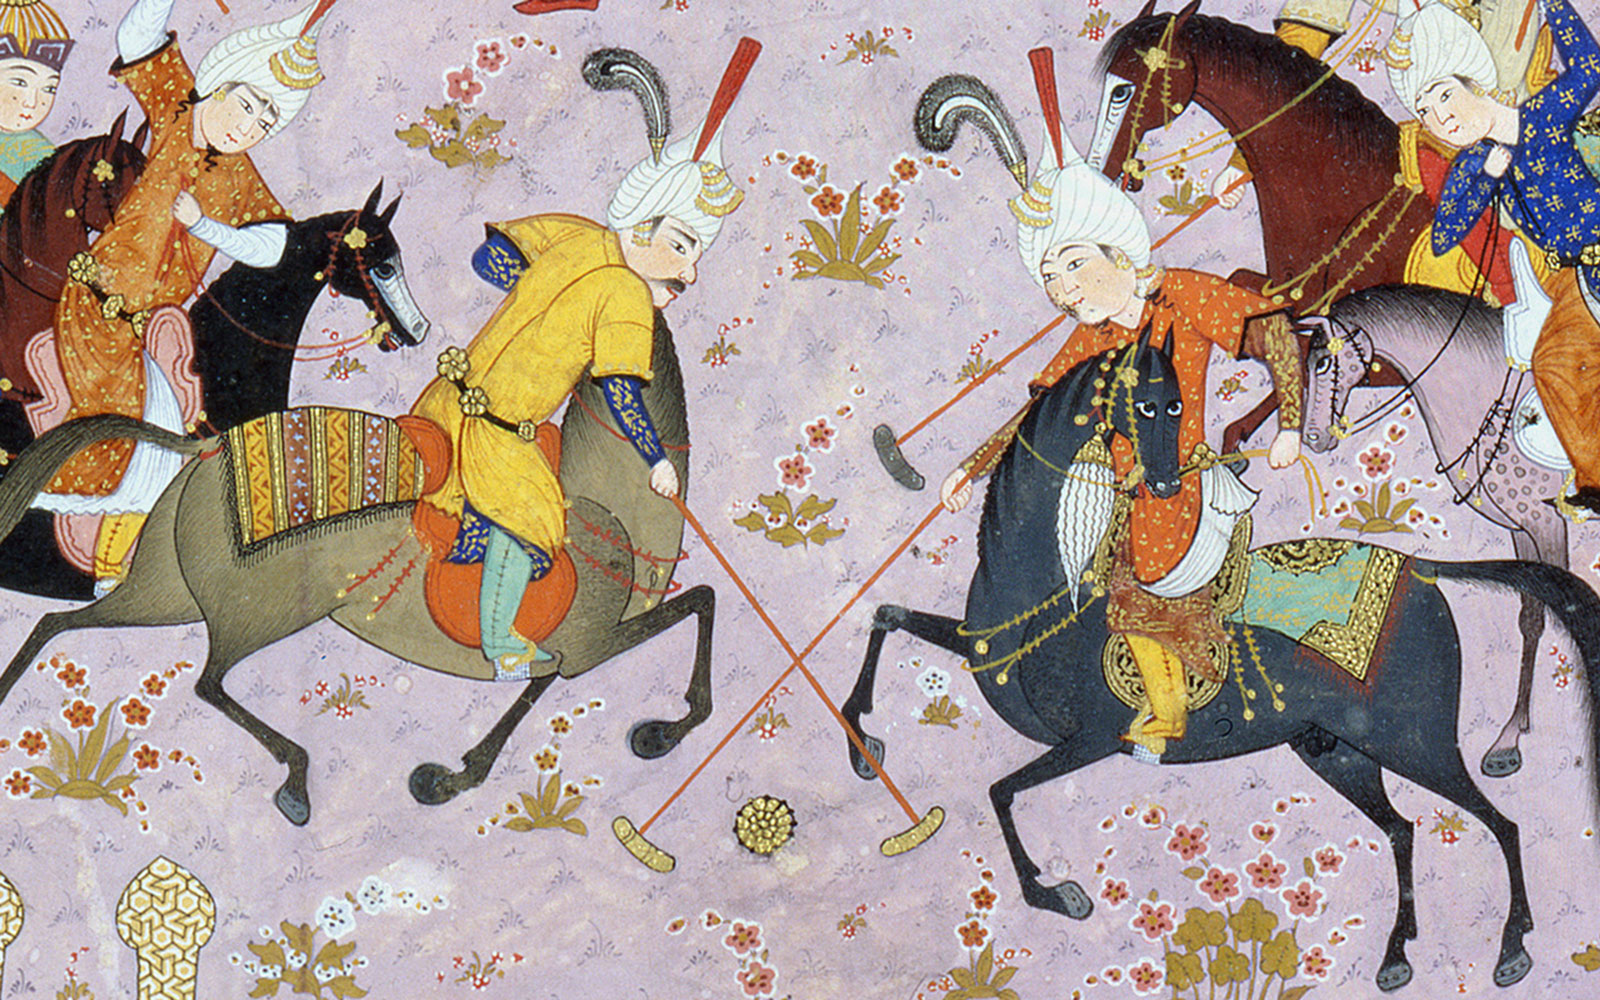 The game of polo © Gulbenkian Museum